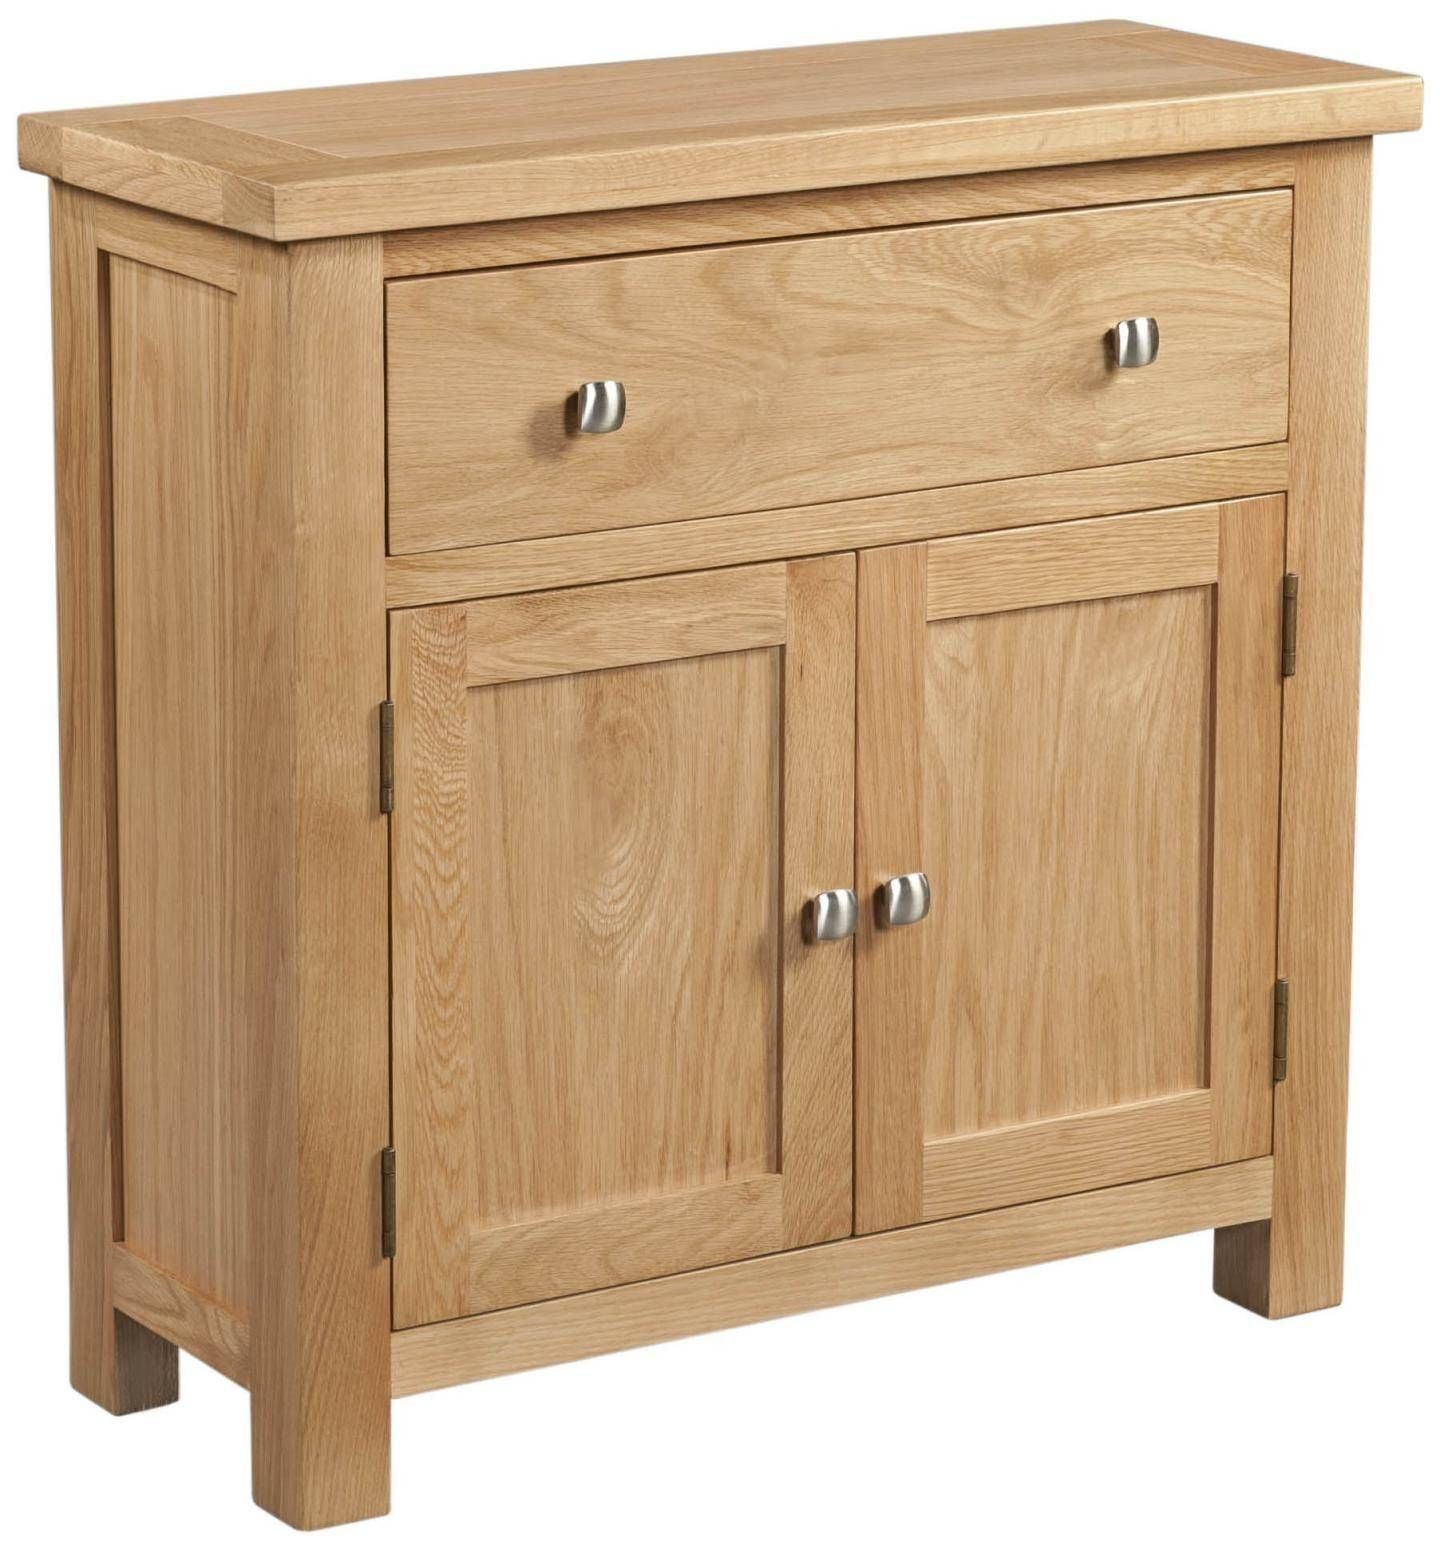 Lovely Pine & Oak Sideboards | Willoby's Furniture Swindon, Wiltshire Inside Small Wooden Sideboards (Photo 1 of 15)